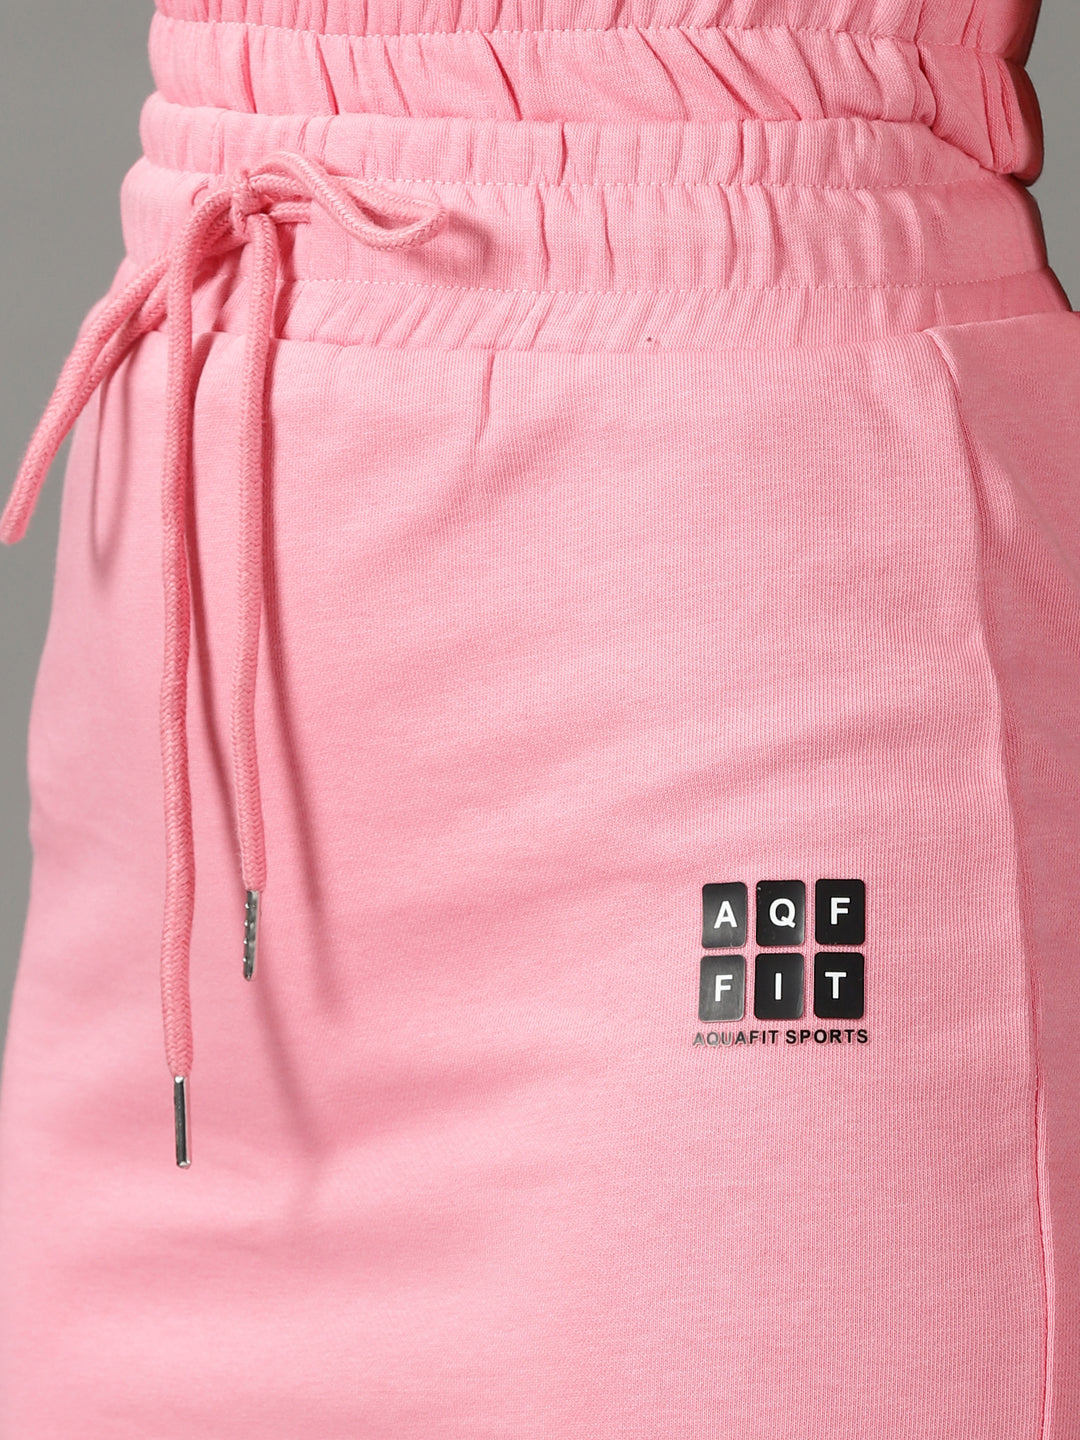 Women's Pink Solid Co-Ords